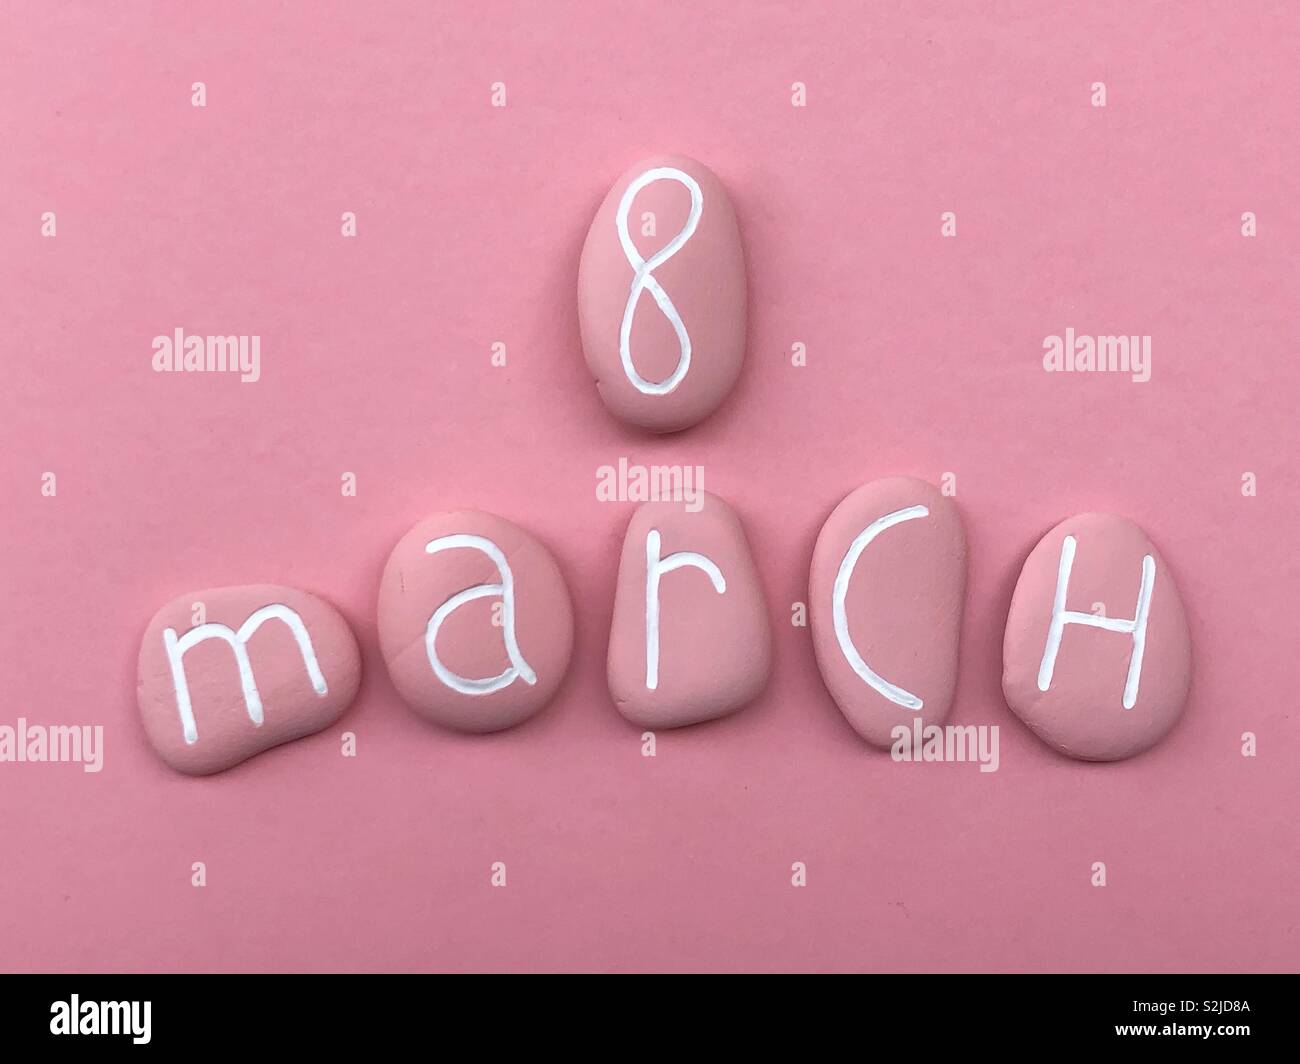 8 March, Women’sDay celebrated with pink colored stones over pink background Stock Photo